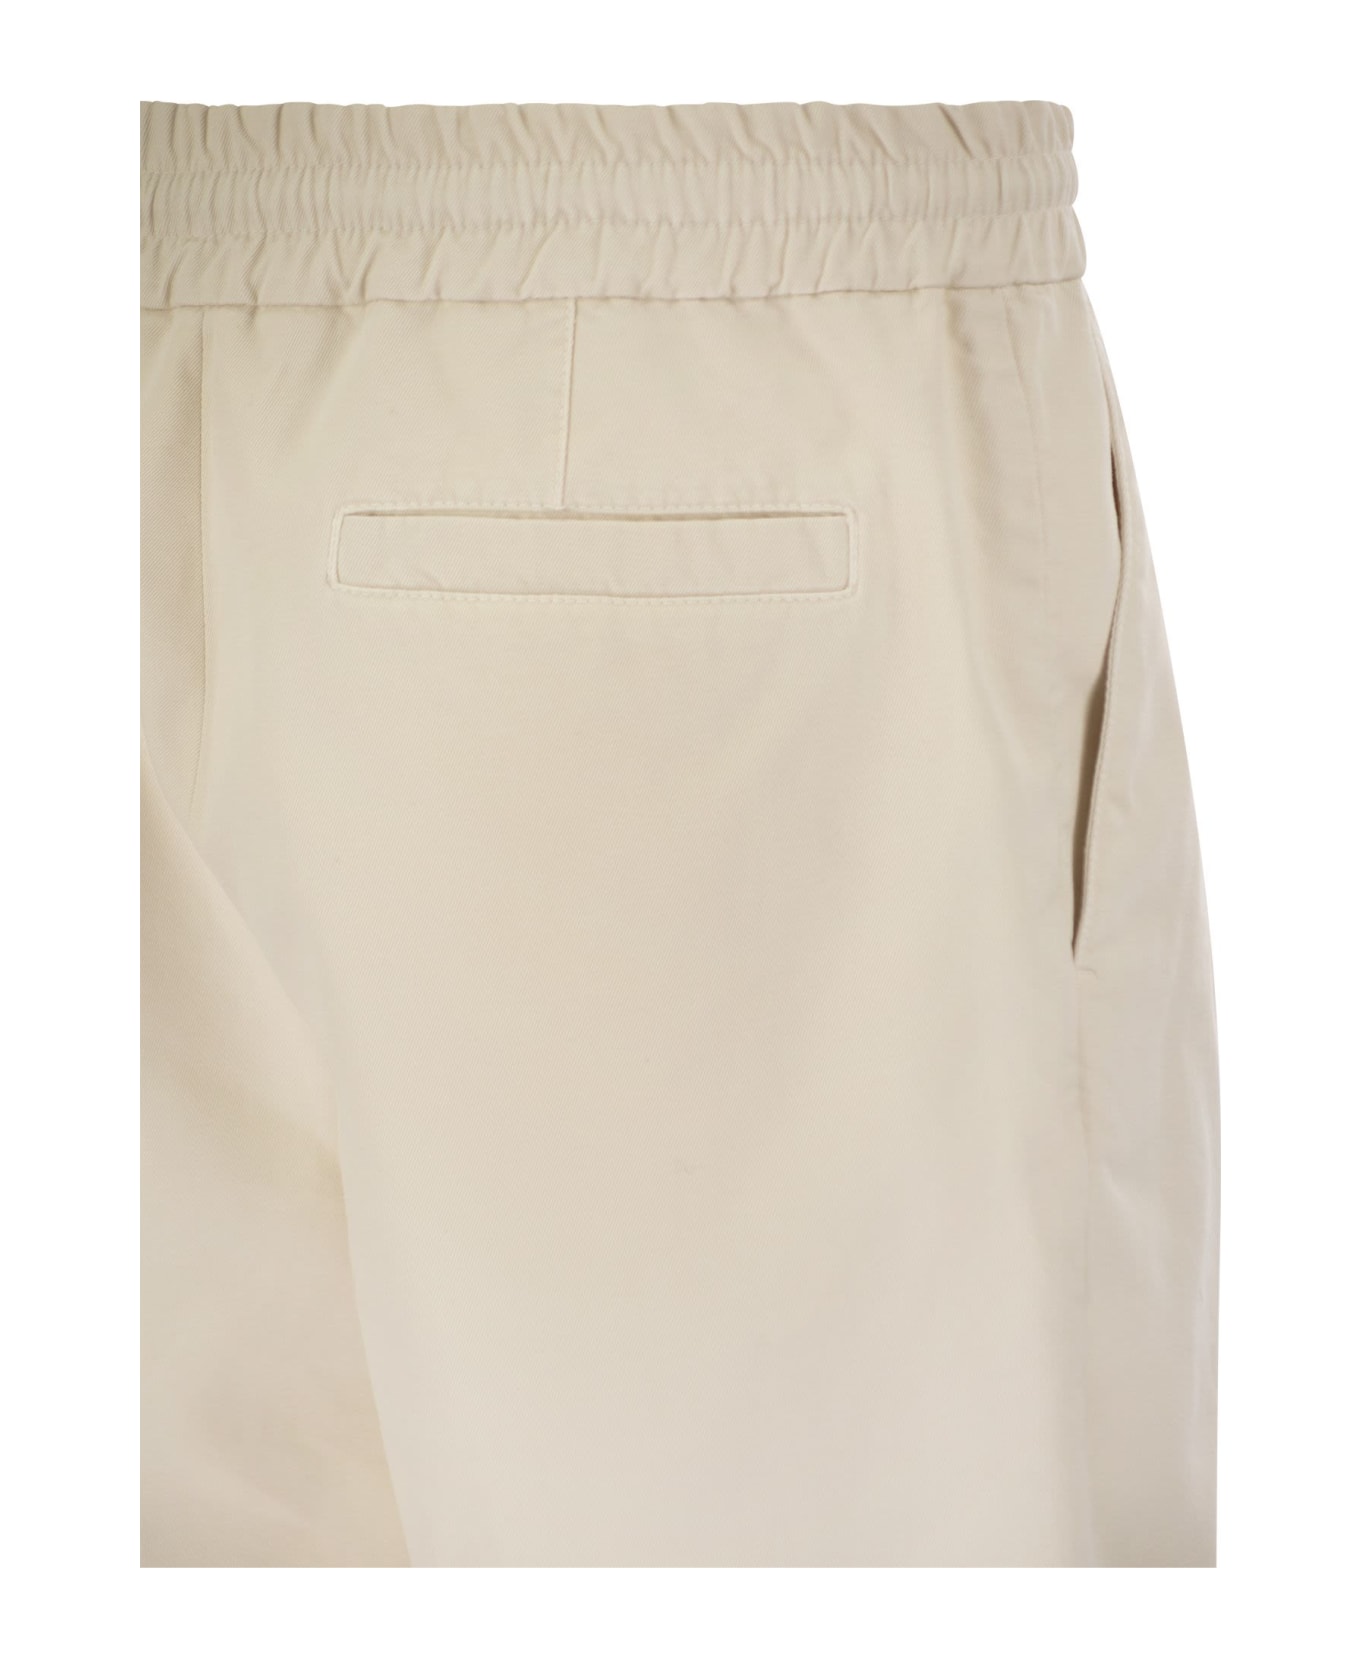 Brunello Cucinelli Bermuda Shorts In Garment-dyed Cotton Gabardine With Drawstring And Double Darts - White ショートパンツ